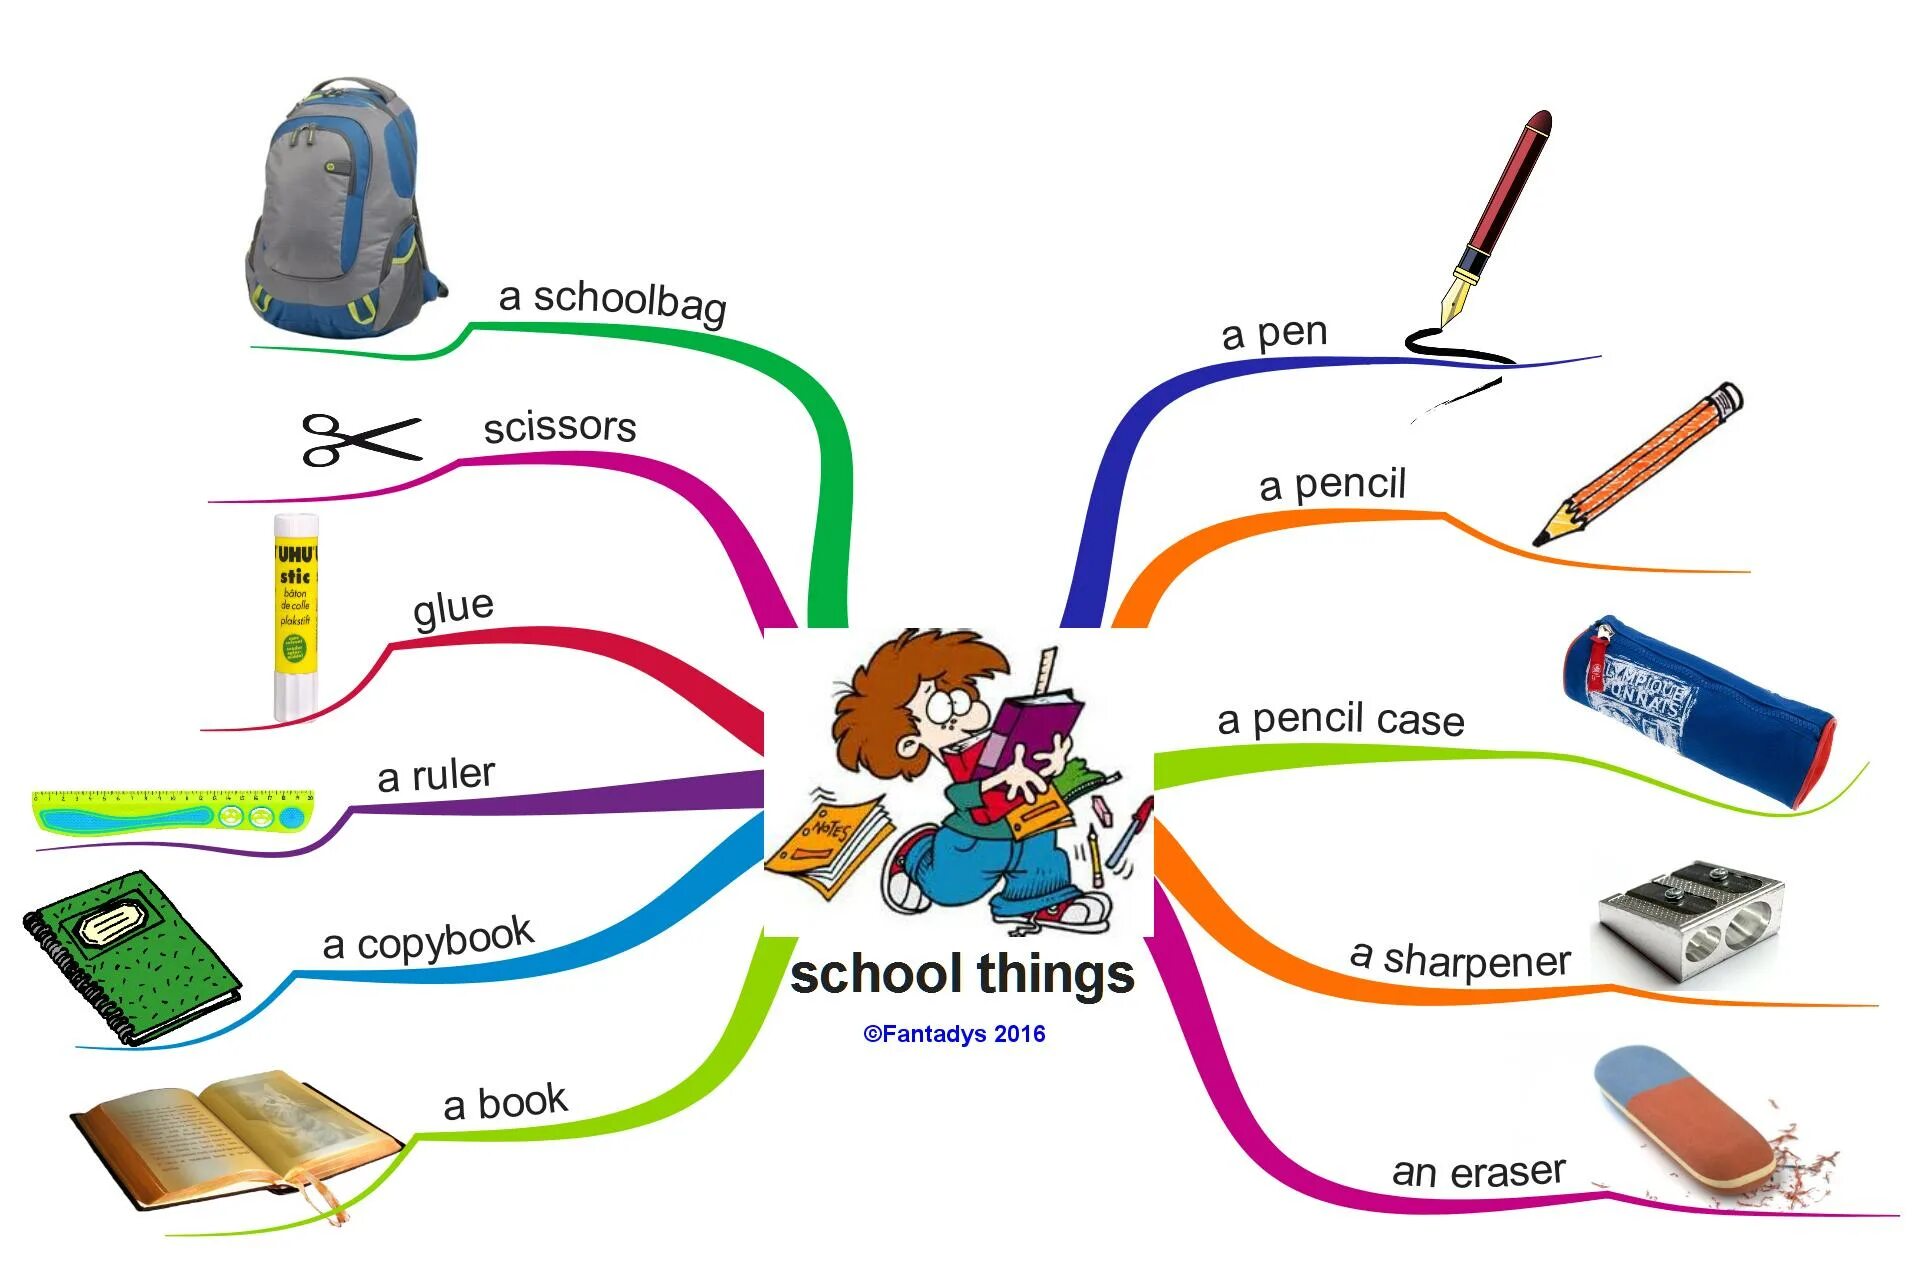 What are these subjects. School things. Карточки School things. Schoolbag на английском. School objects.